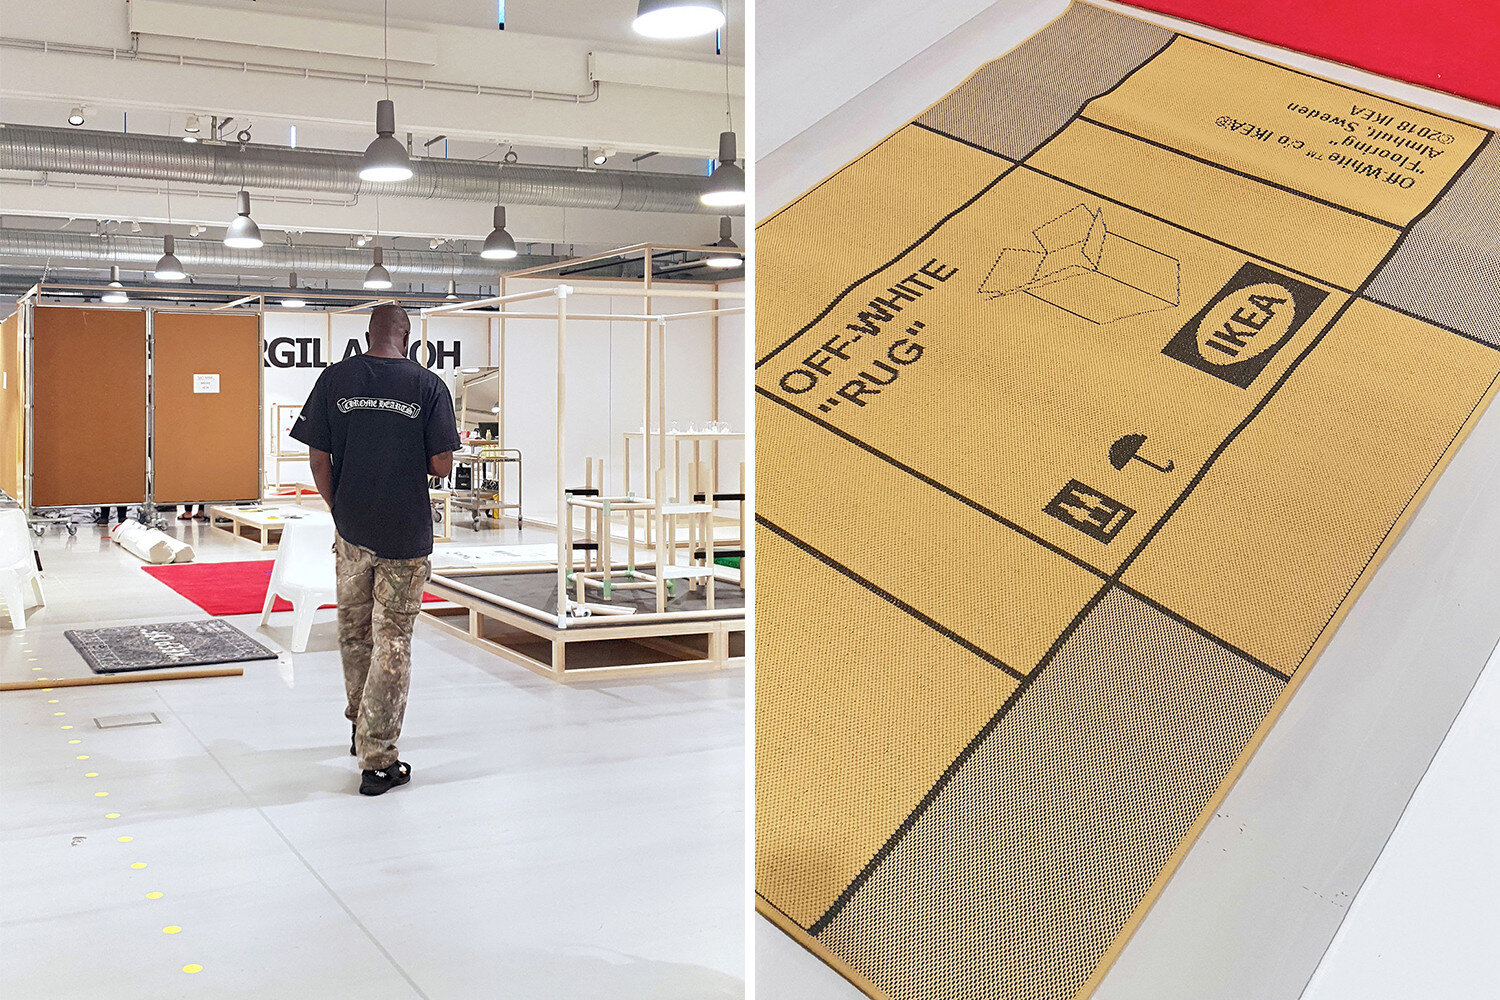 The Ikea X Virgil Abloh collection drops on November 1